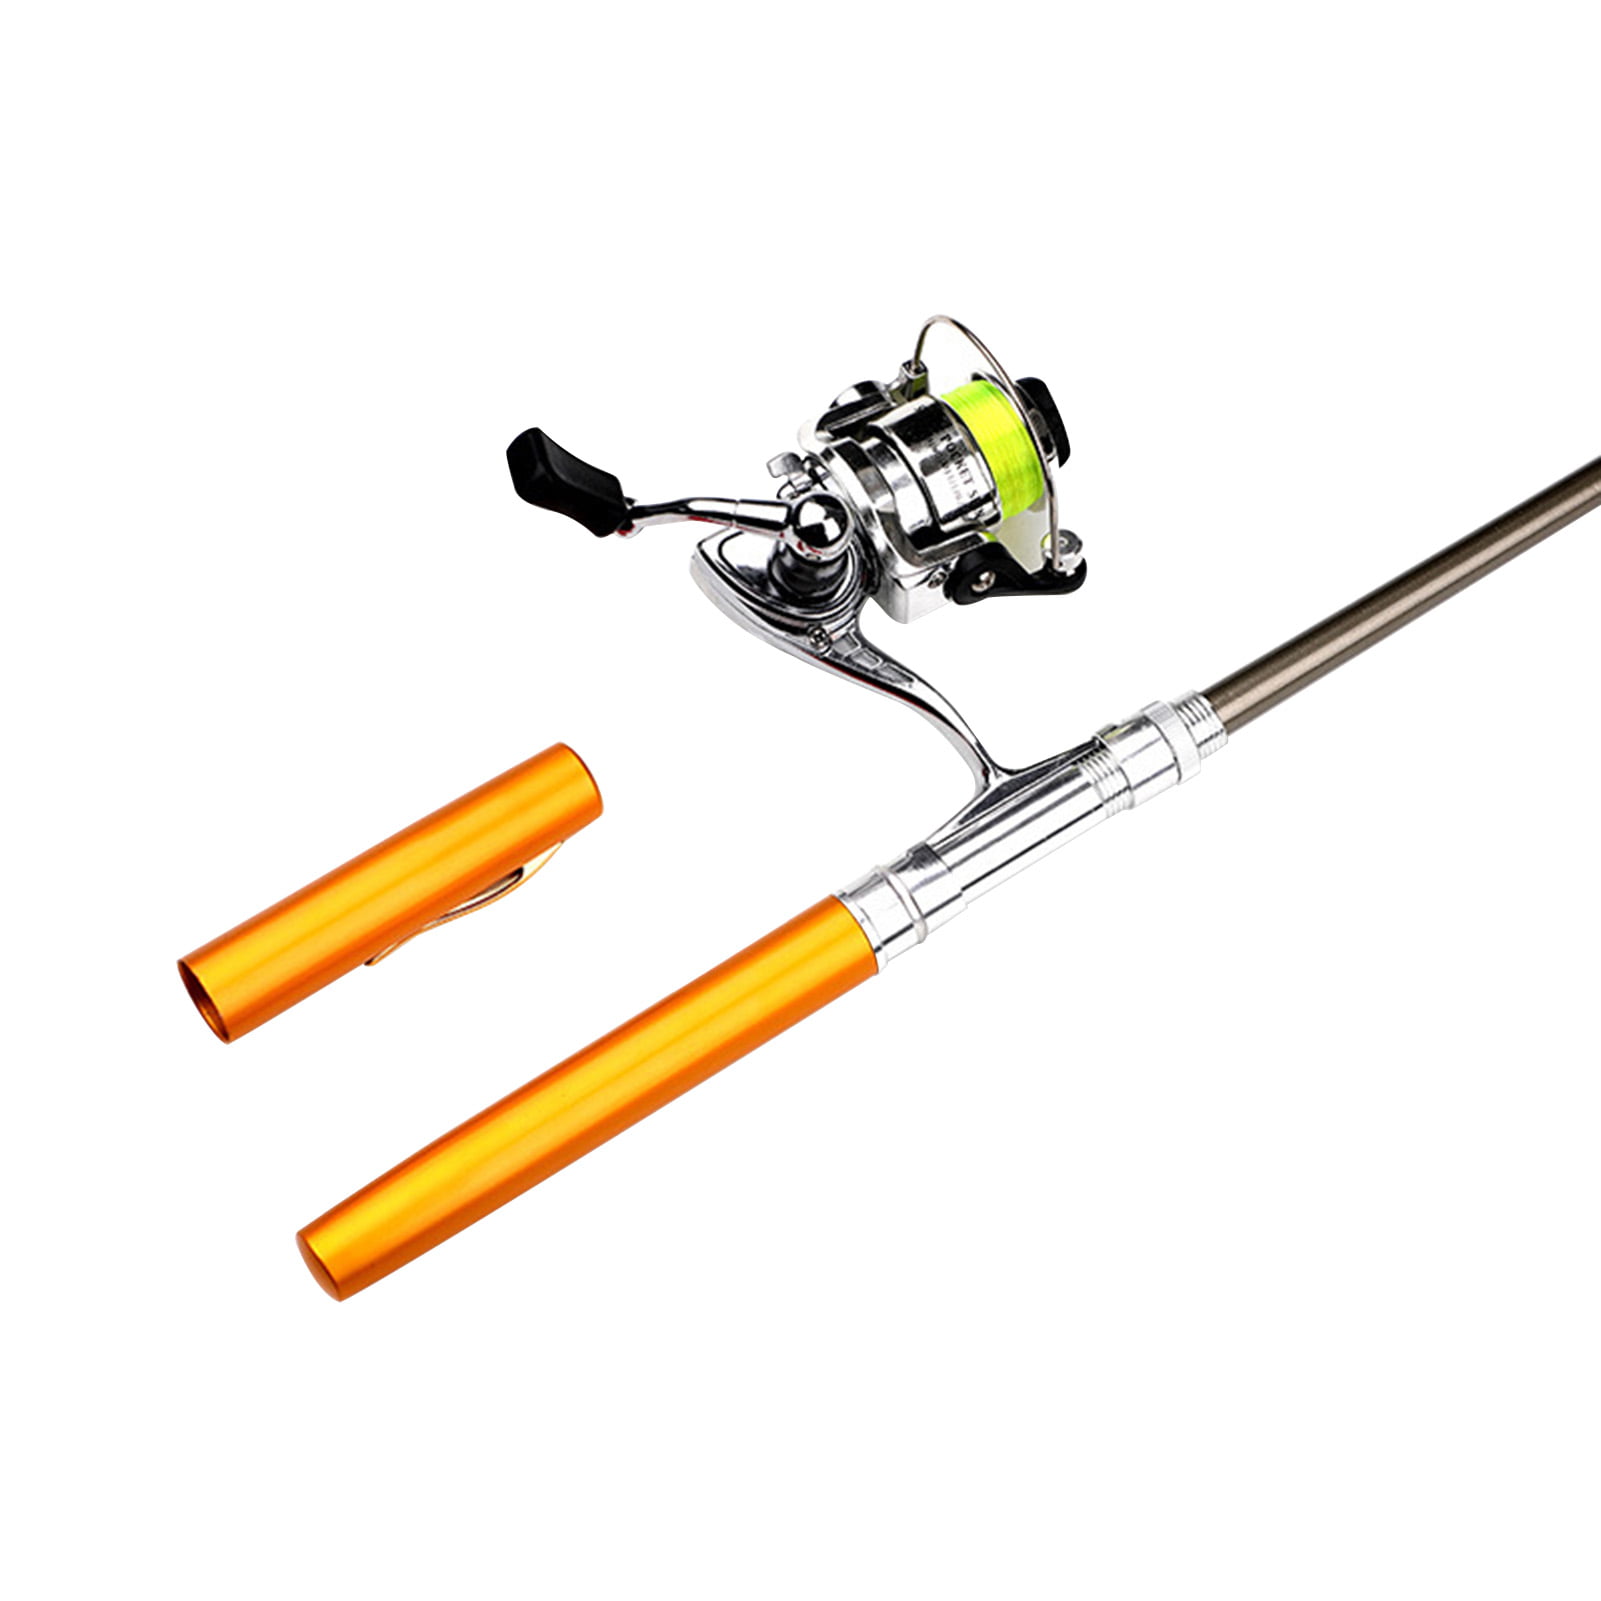 Compact Fishing Rod Set With Separate Reel, Ice Combo Pen, Pole Lures,  Spinning Casting, And Hard Rod For Fall And Winter Boat2704 From Jk7860,  $24.02